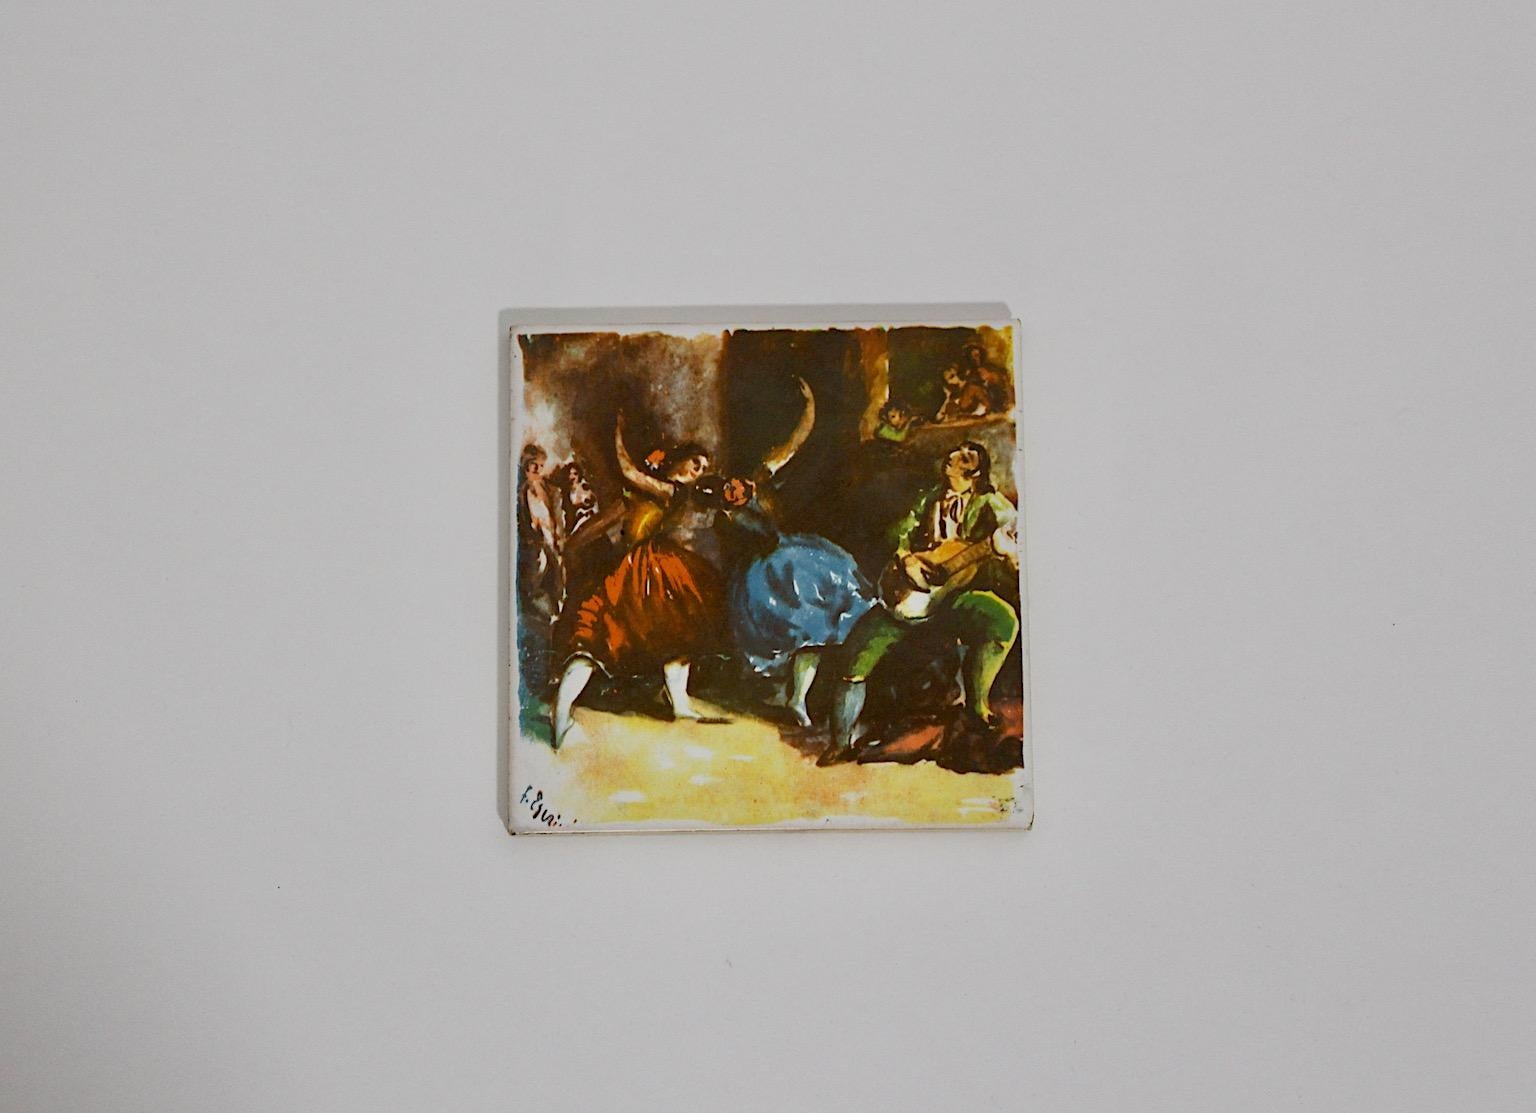 Mid-Century Modern vintage glazed ceramic tile multicolored colors 
Flamenco scene 1960s Soain.
A stunning glazed ceramic tile with Flamenco scene in multicolored colors circa 1960s. Labeled with Onda espana.
Good condition with signs of age as a